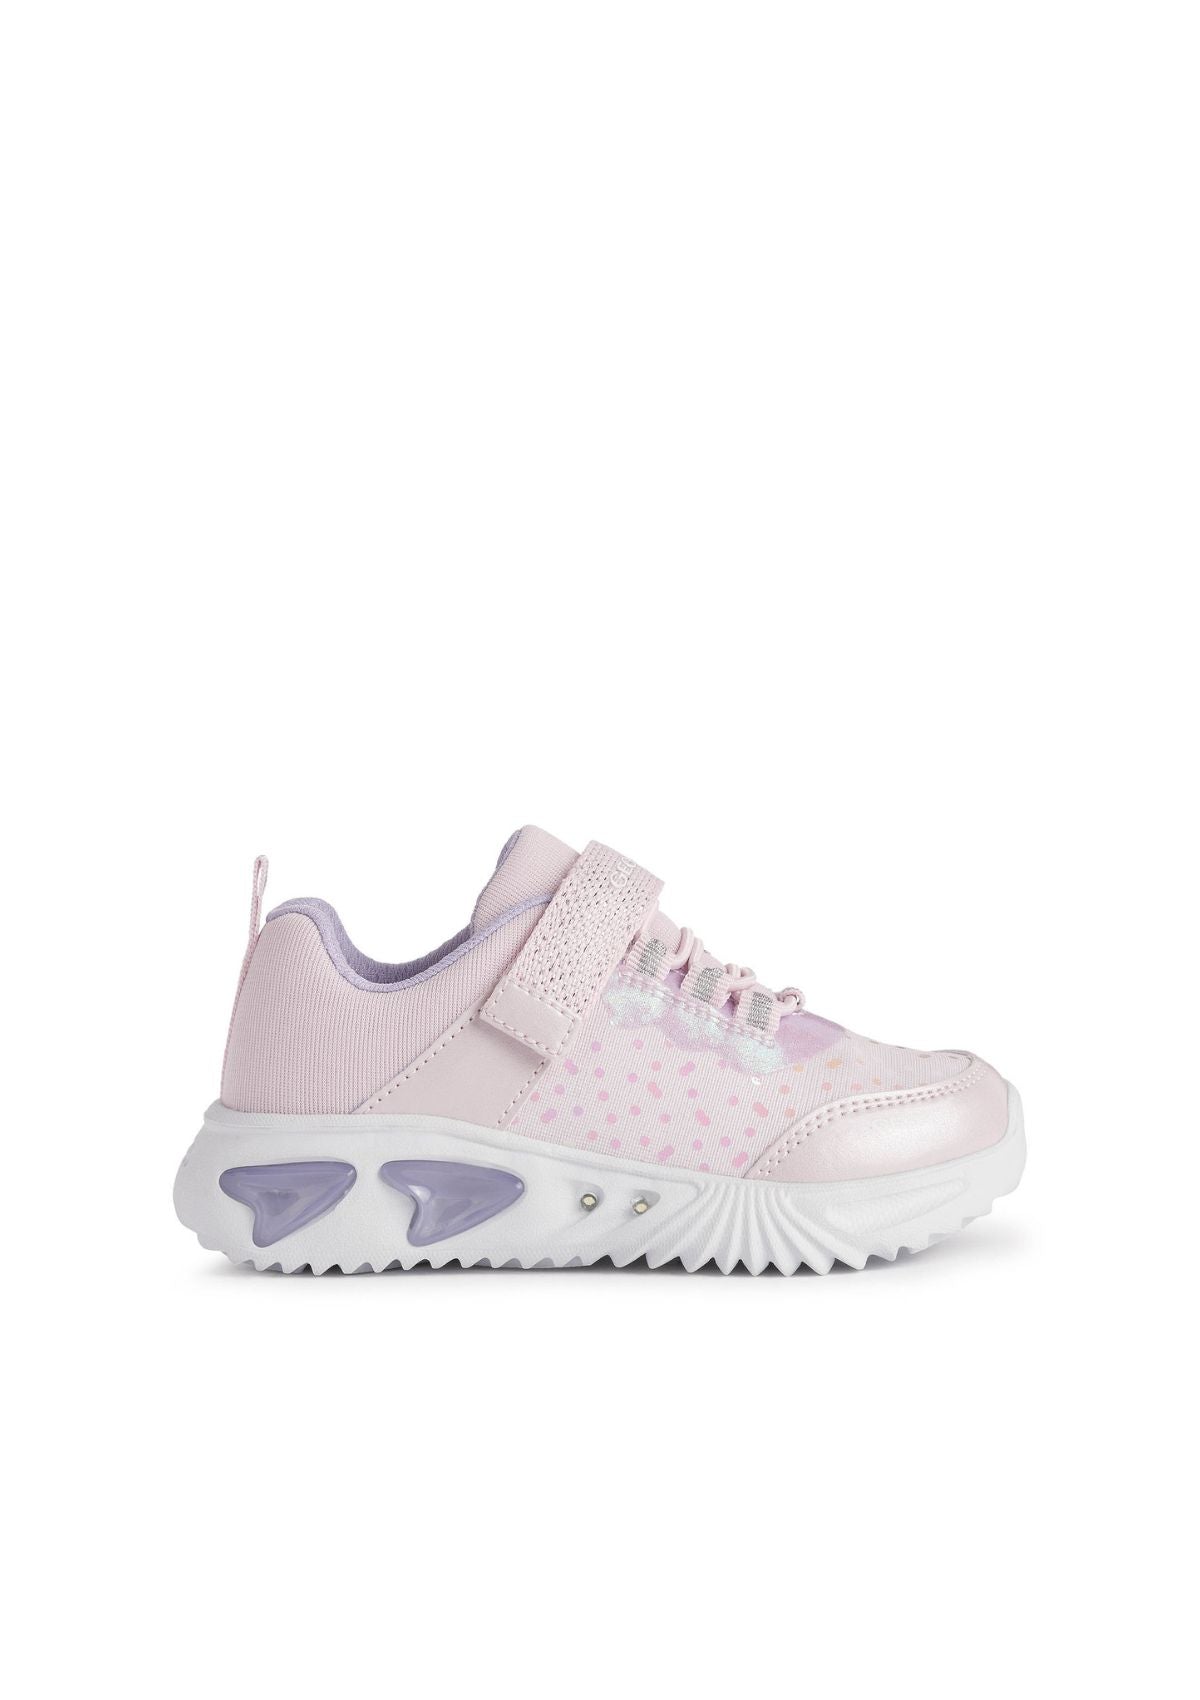 Geox Junior Girls ASSISTER Pink Lilac side